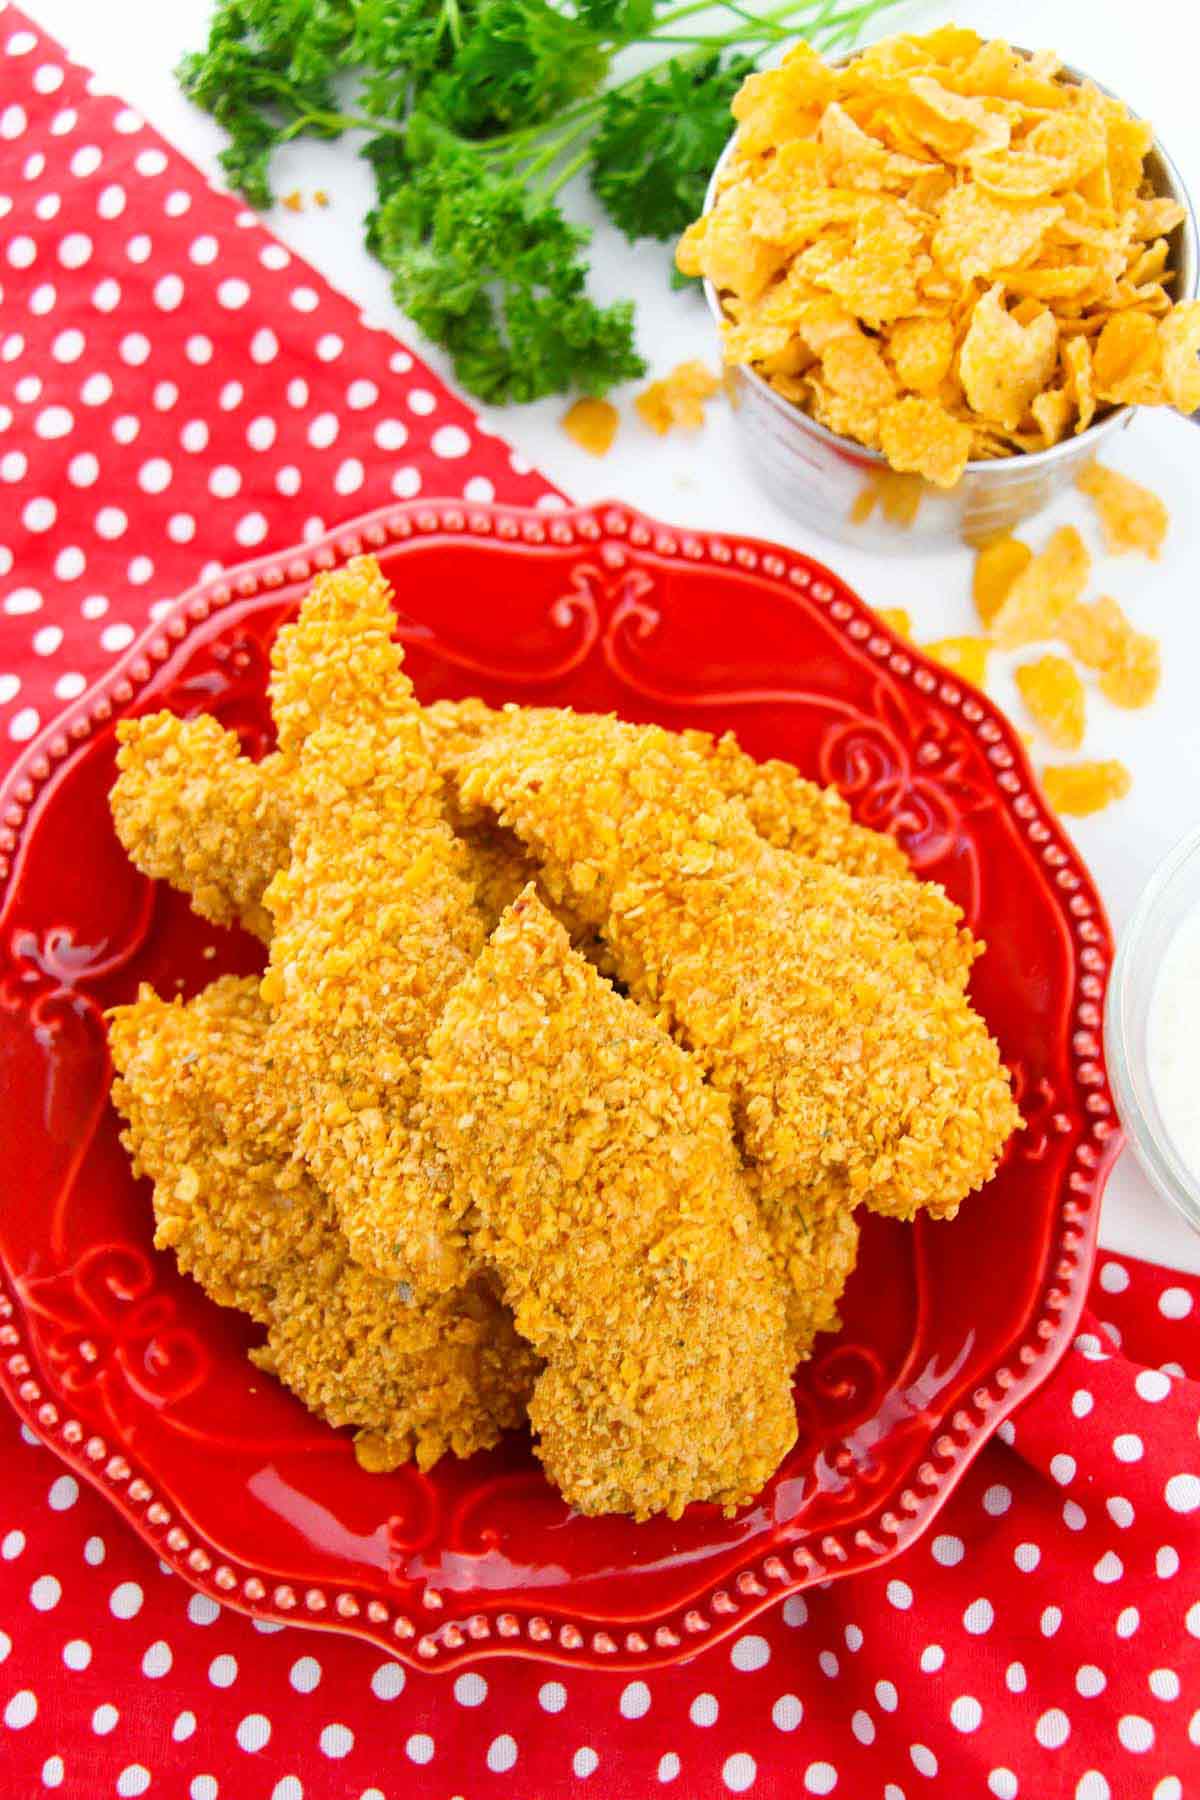 Chicken tenders on a red plate.